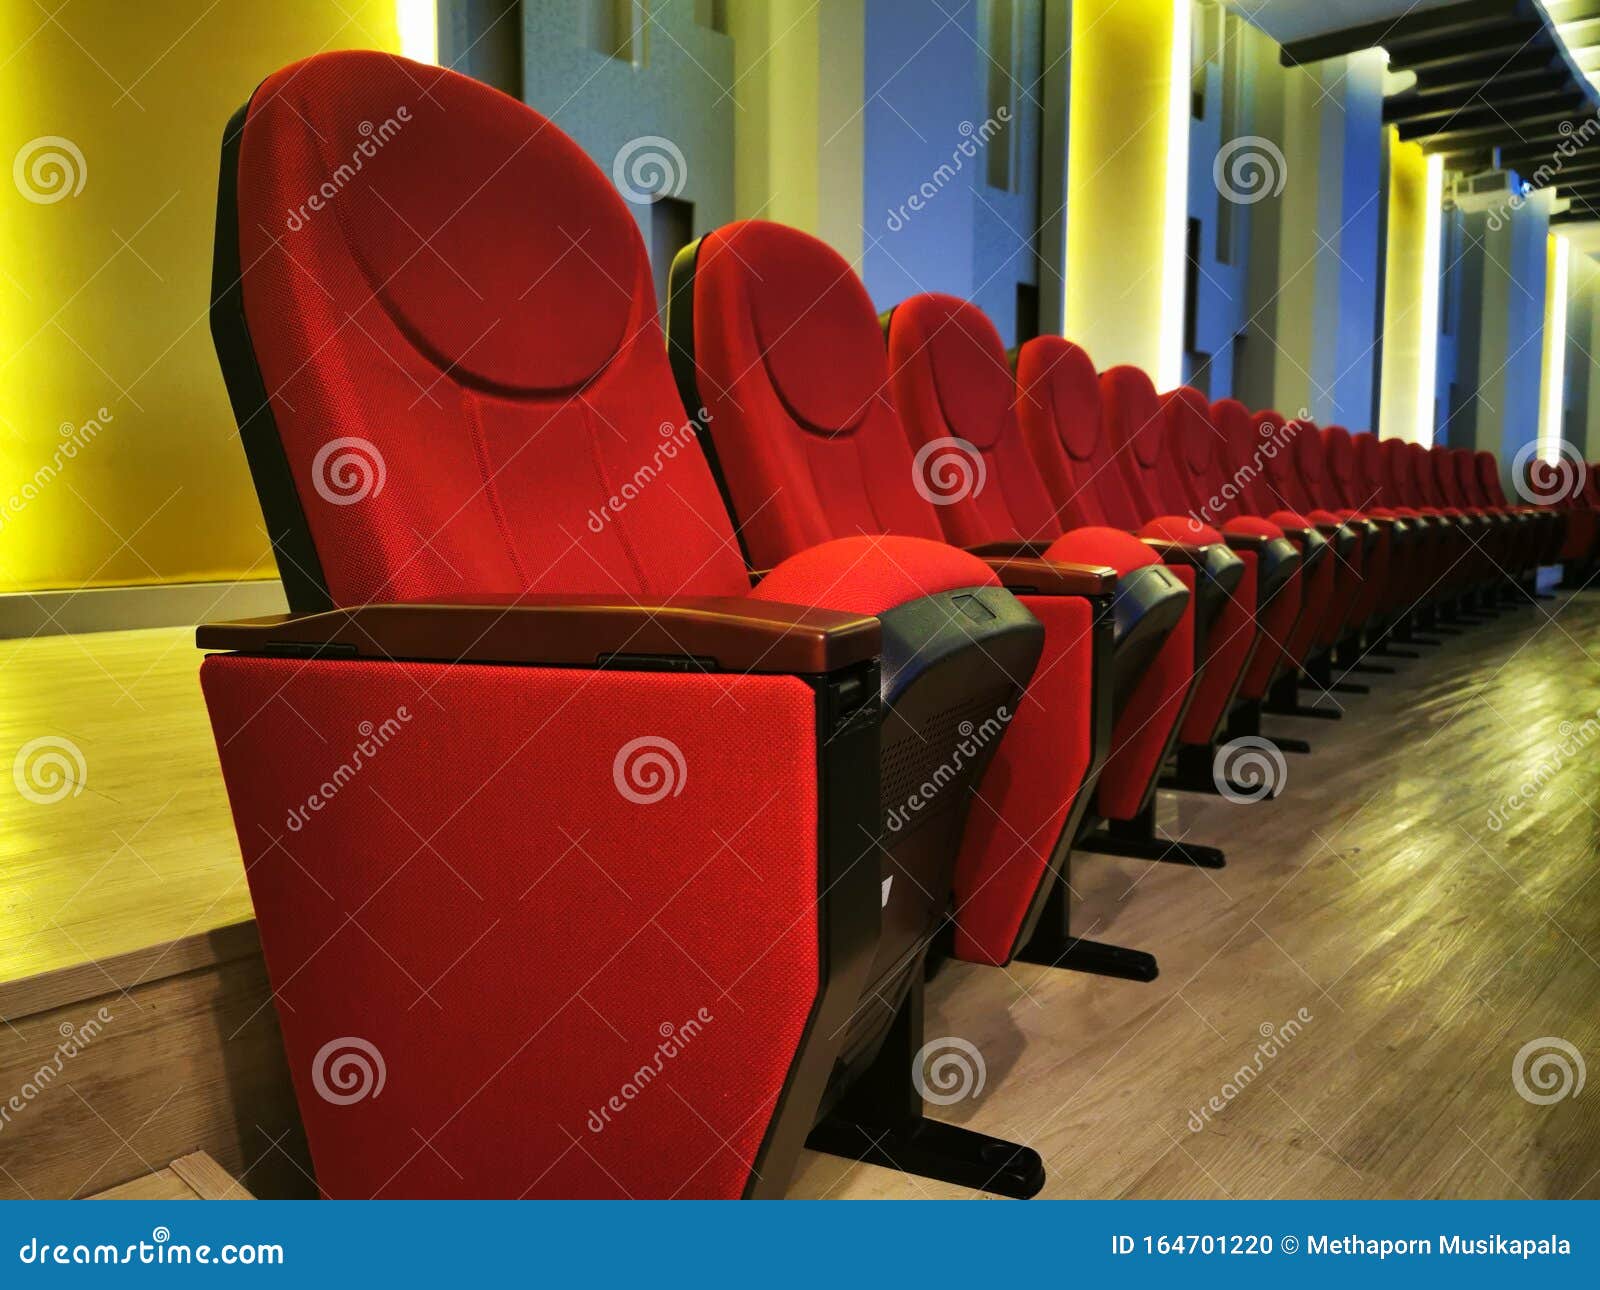 row of large red chair for watching movies in cinemas or theaters